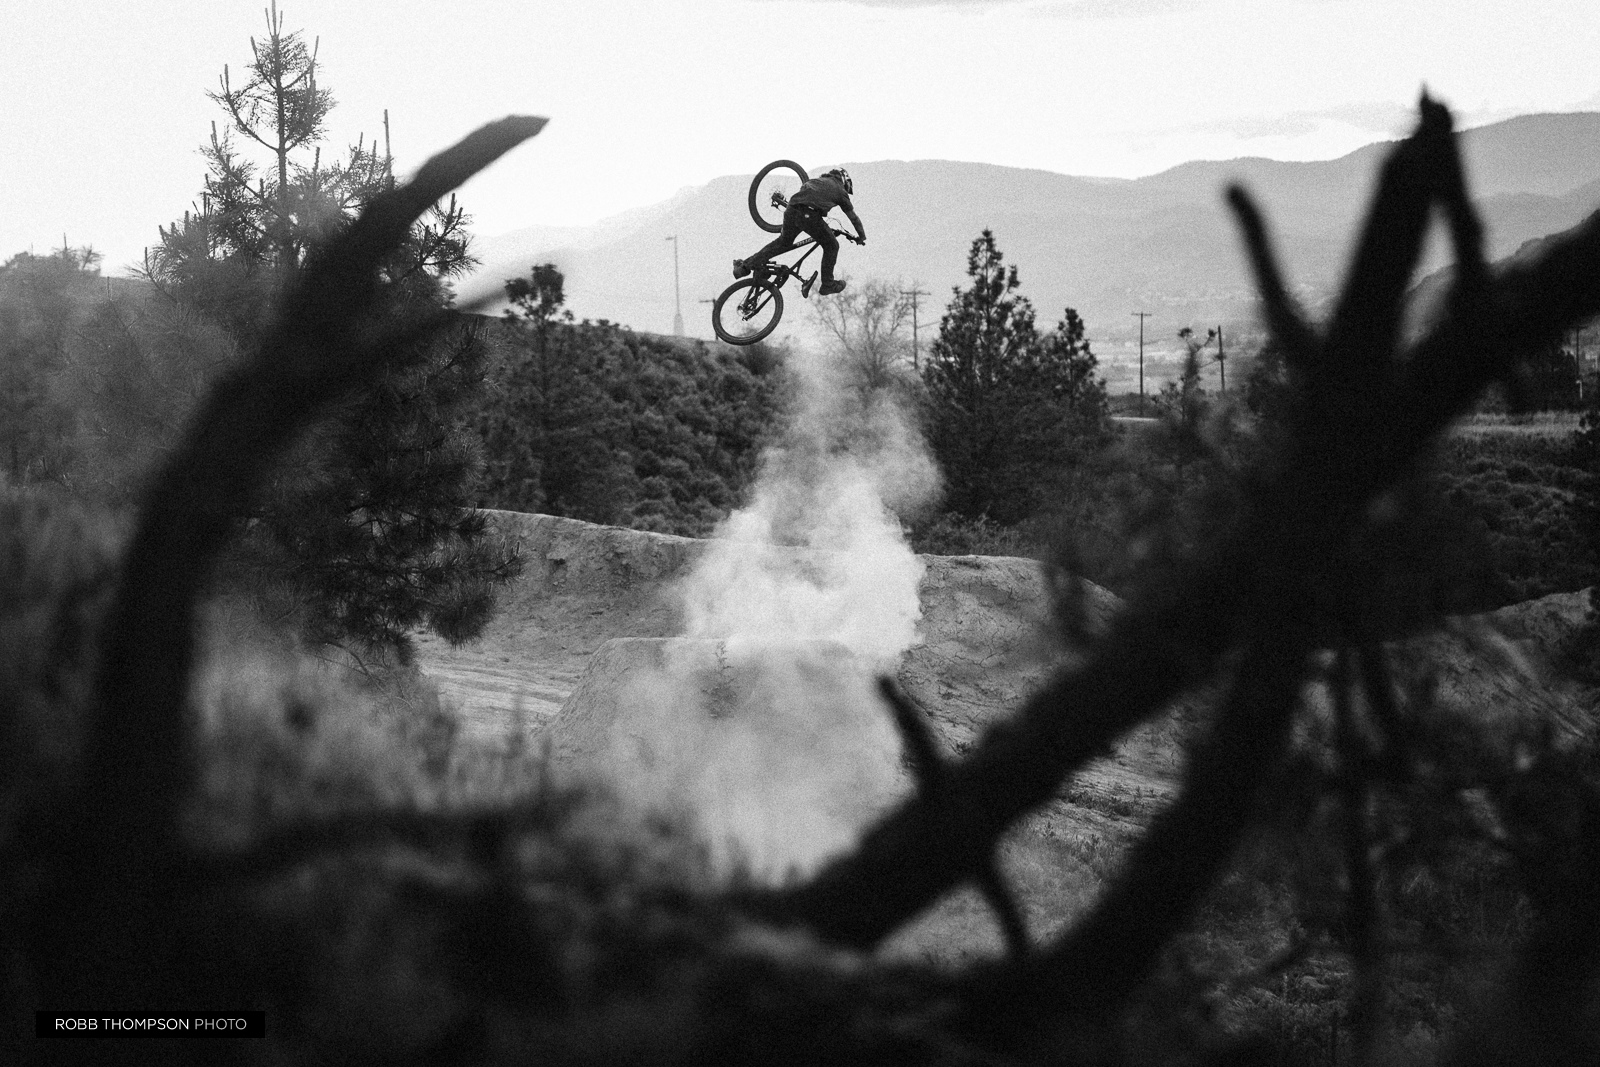 Aggy sending it Kamloops style with a plume of dust.